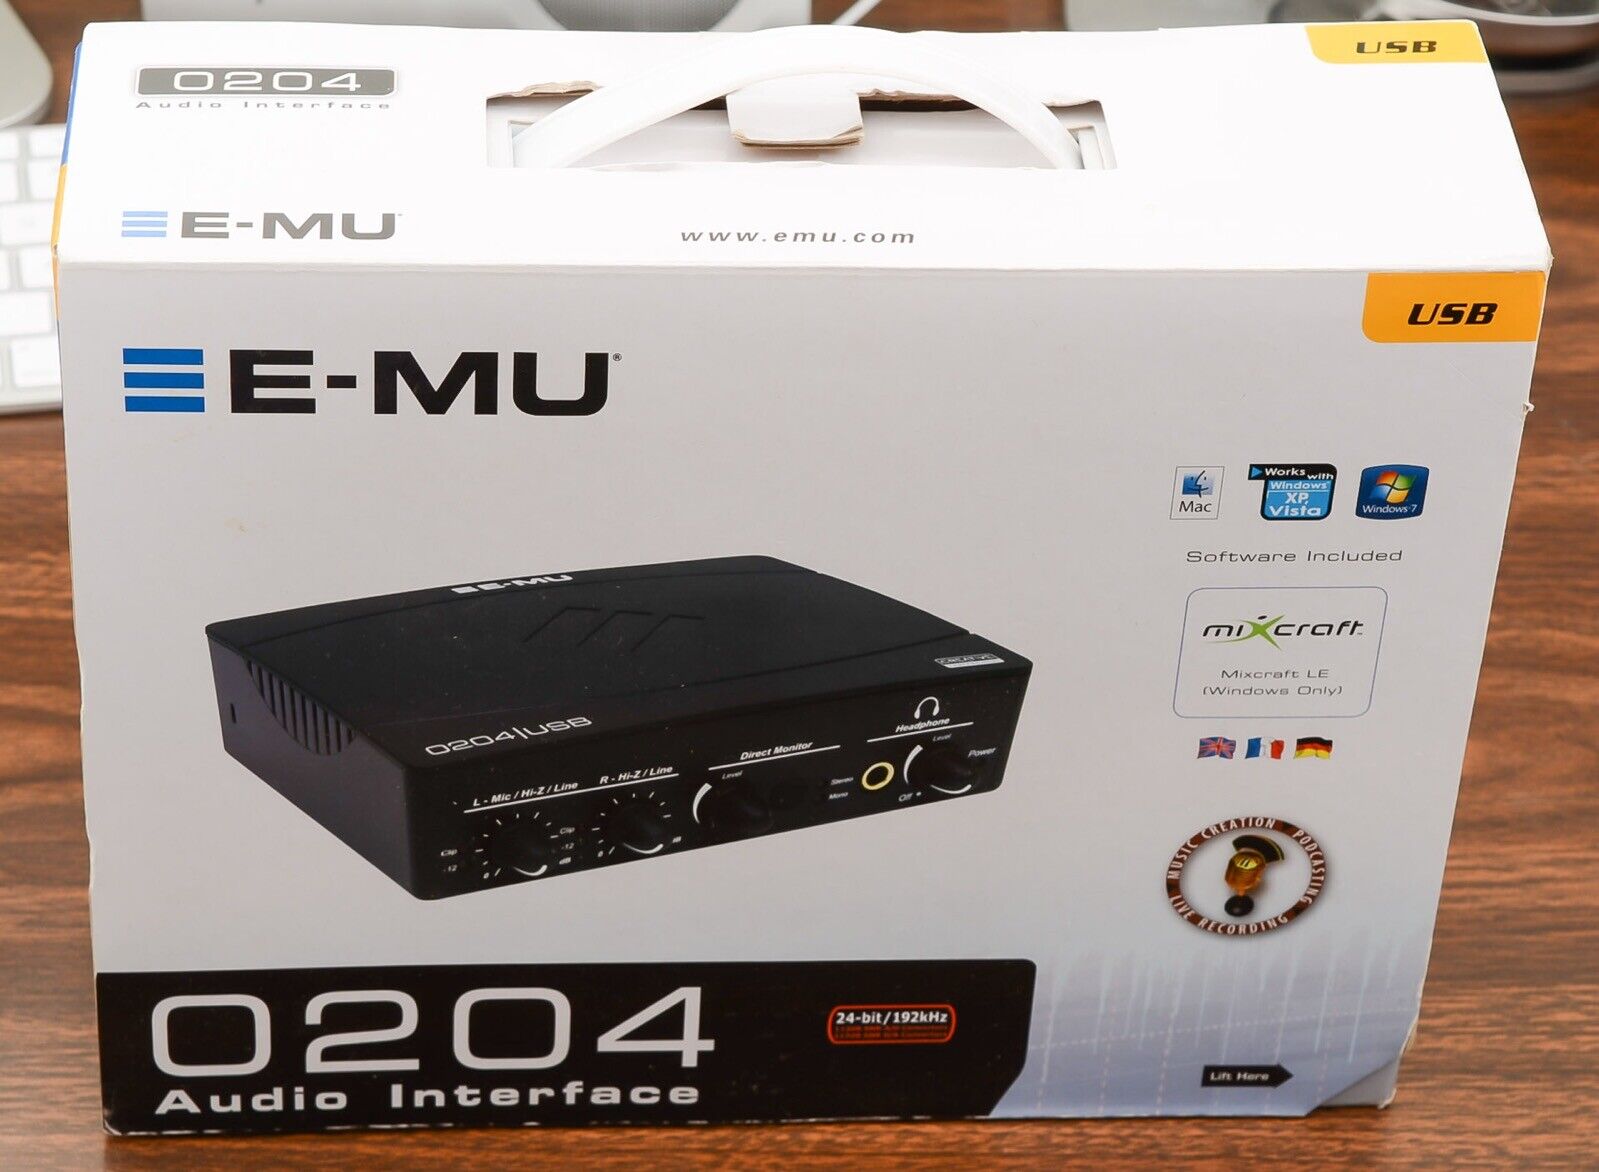 Finally popular brand E-MU 0204 USB SOUND CARD AND BOX Recommendation WITH CABLE